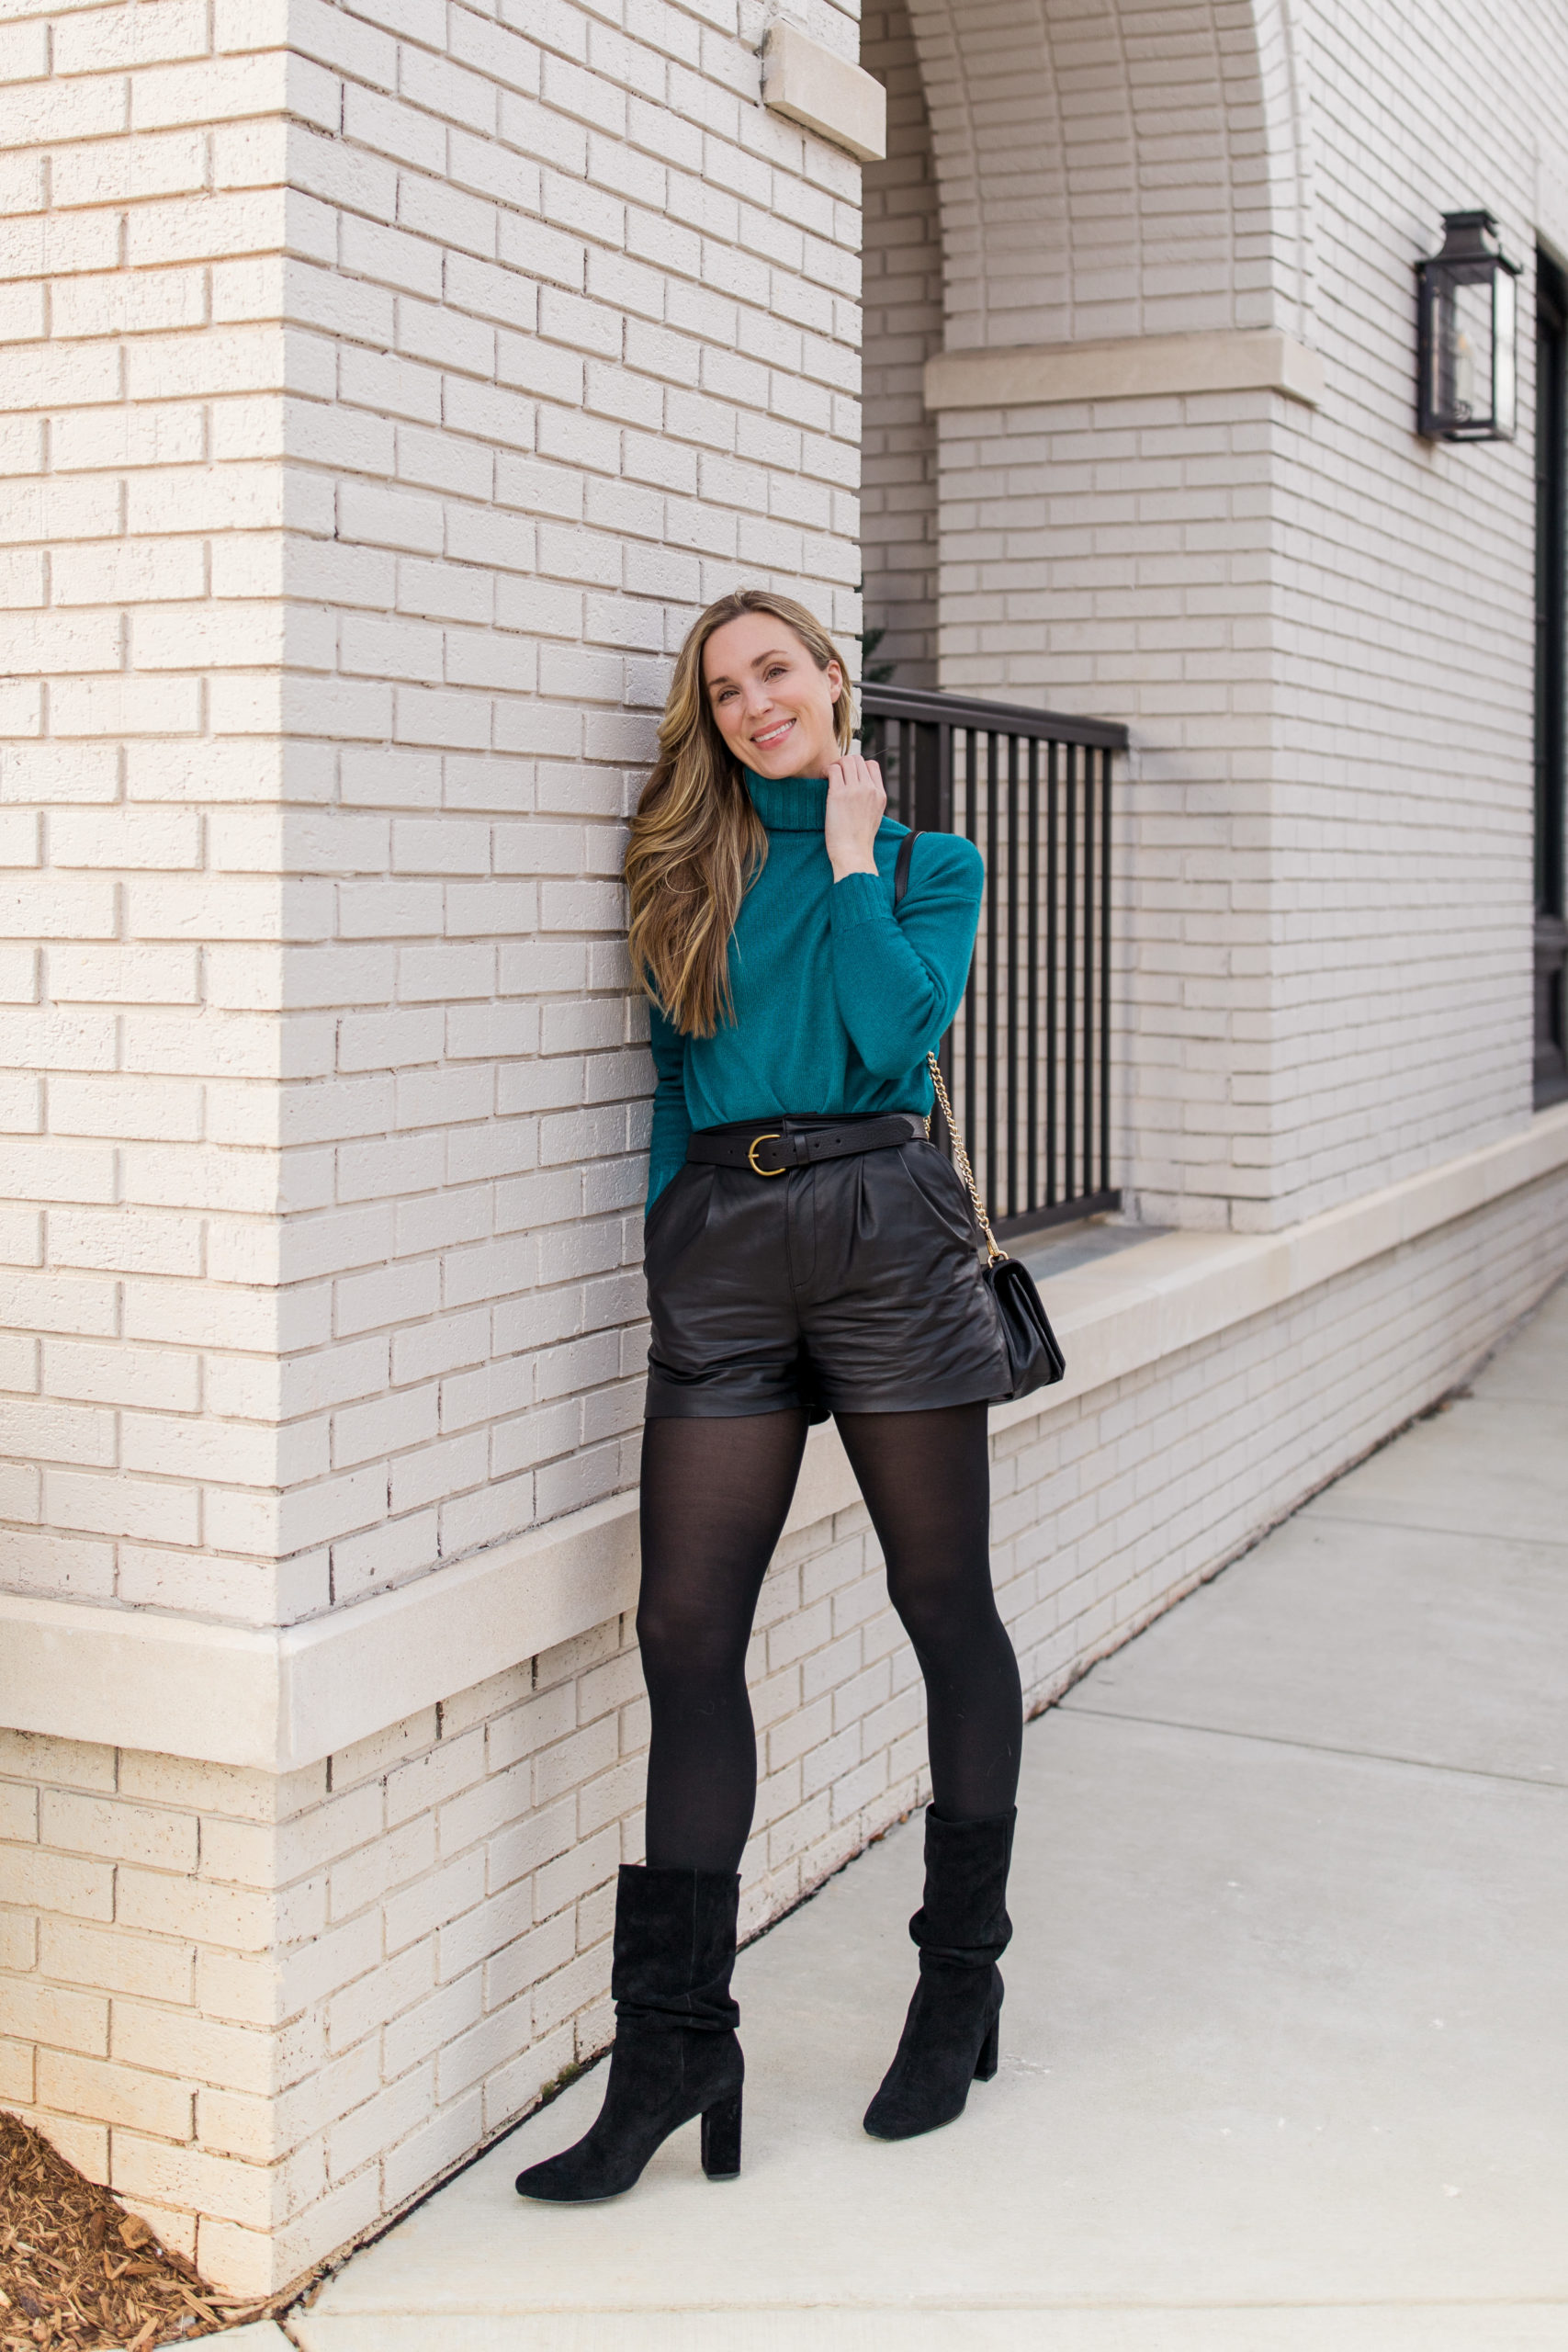 winter date night outfit ideas and tips